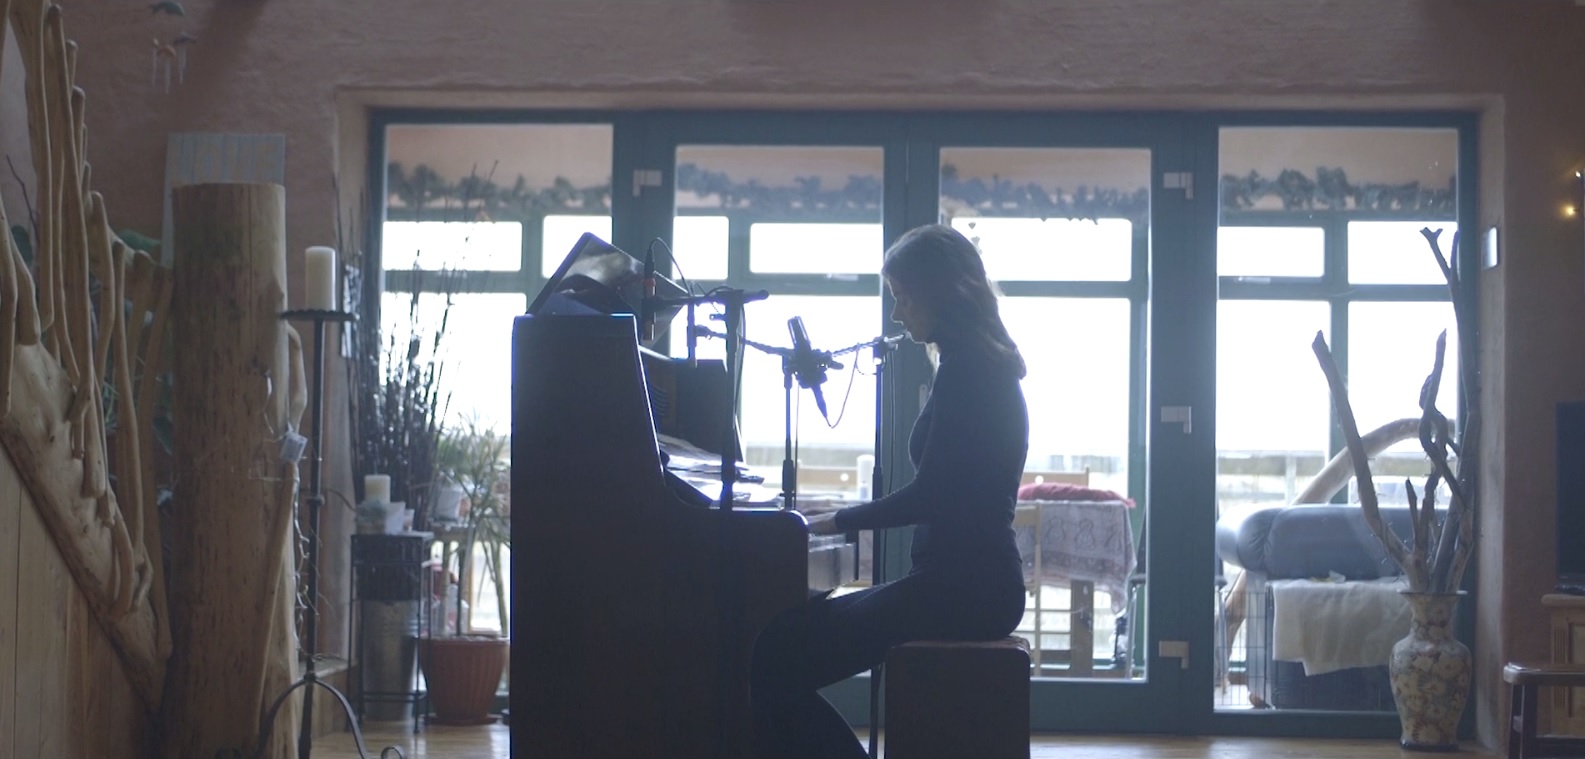 Screenshot from Rosie Carney's acoustic video for "Awake Me"